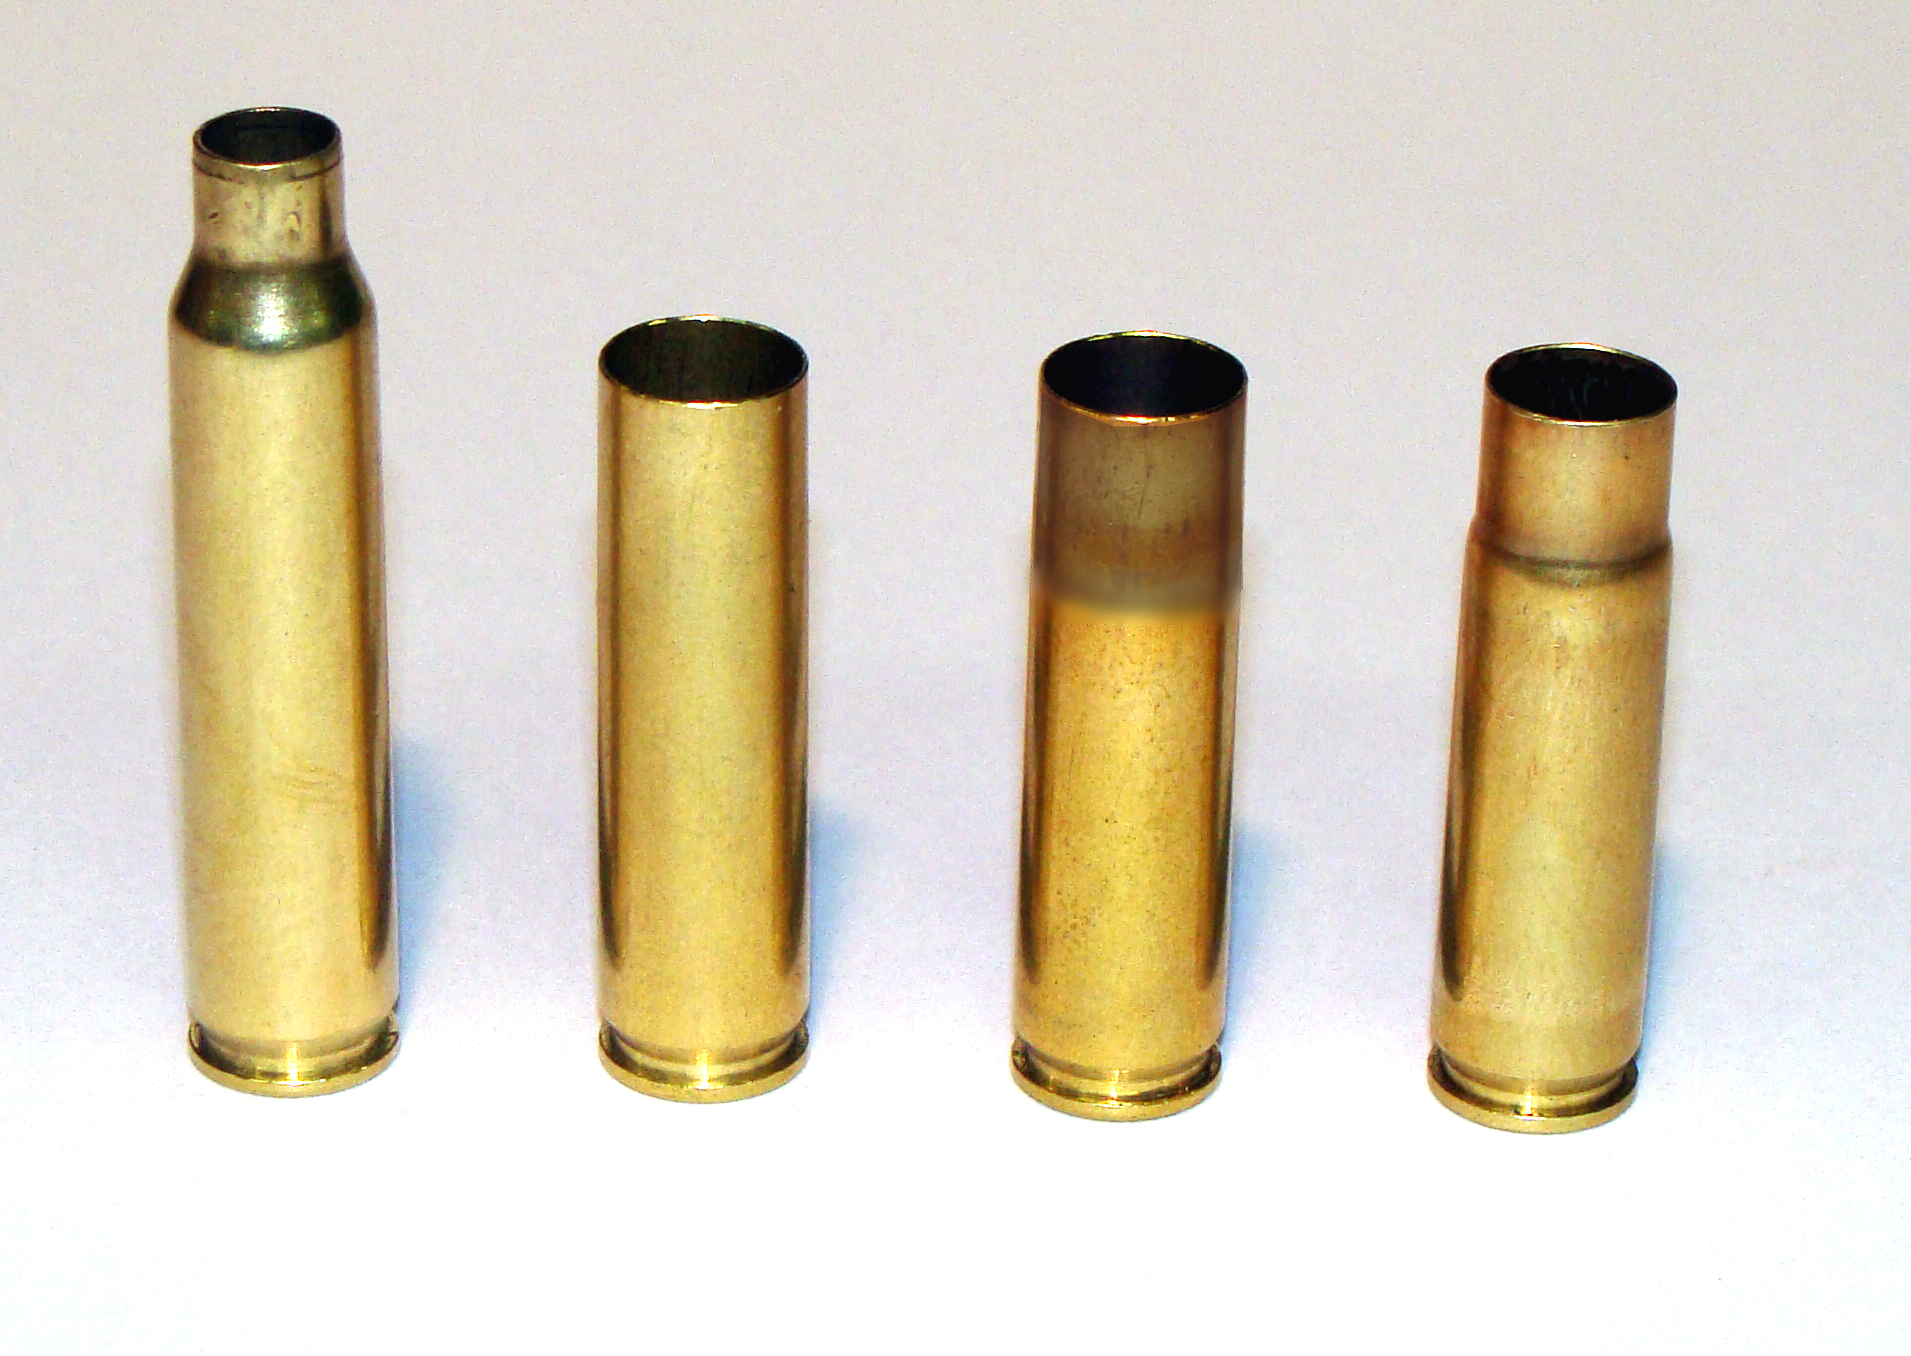 Annealing is a tricky but important step in making .300 BLK cases from .223 brass